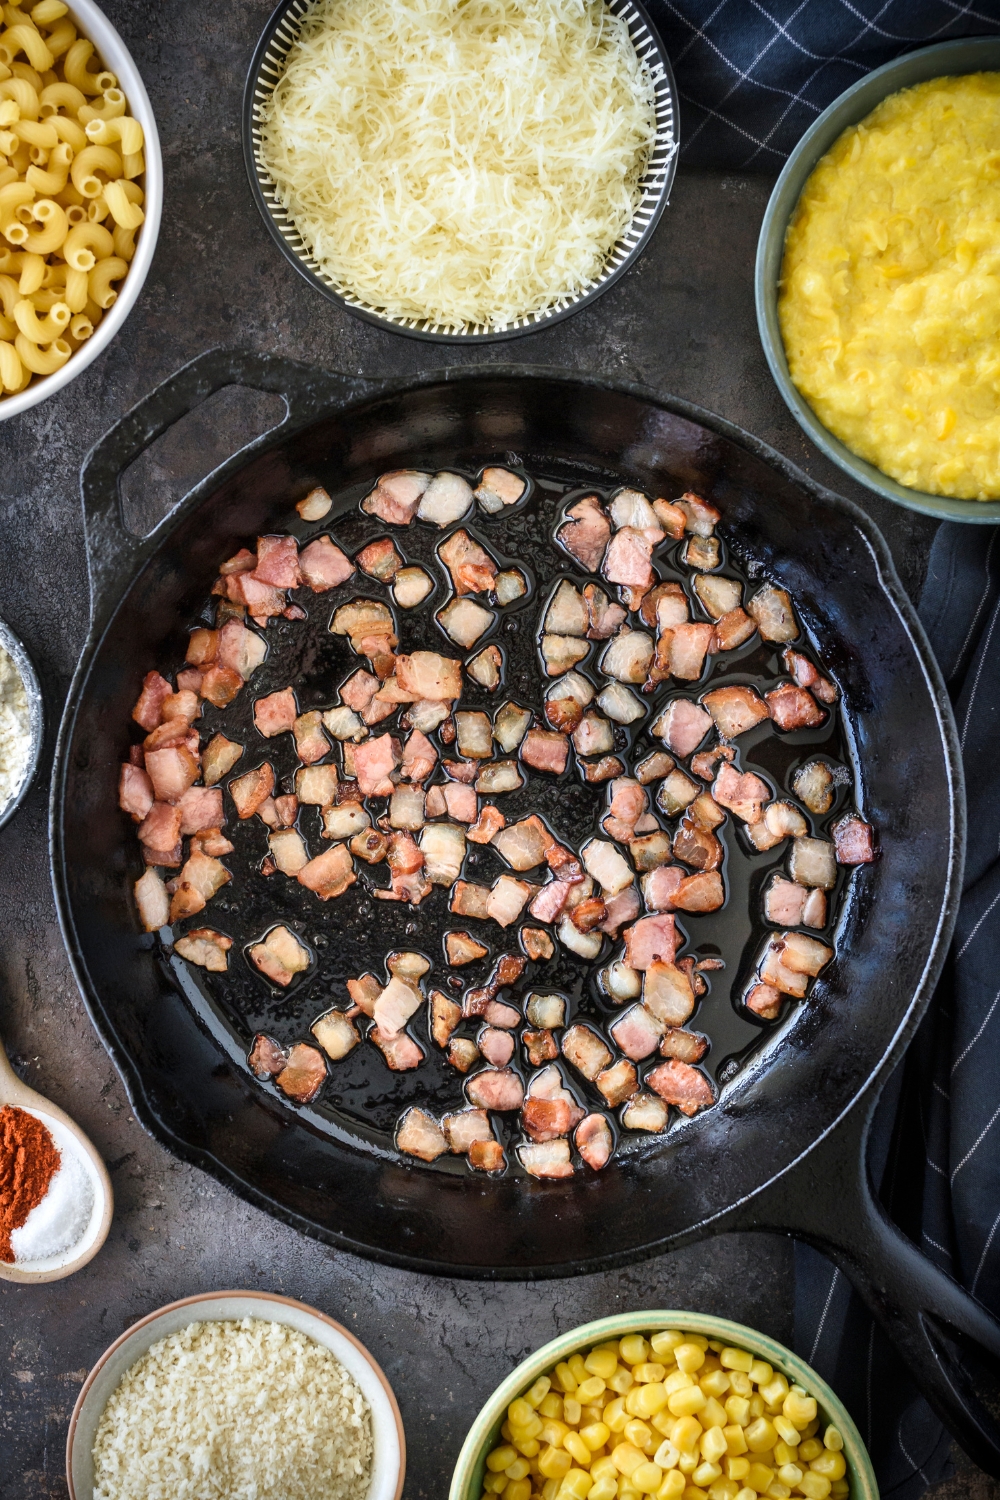 A skillet with bacon cooking.